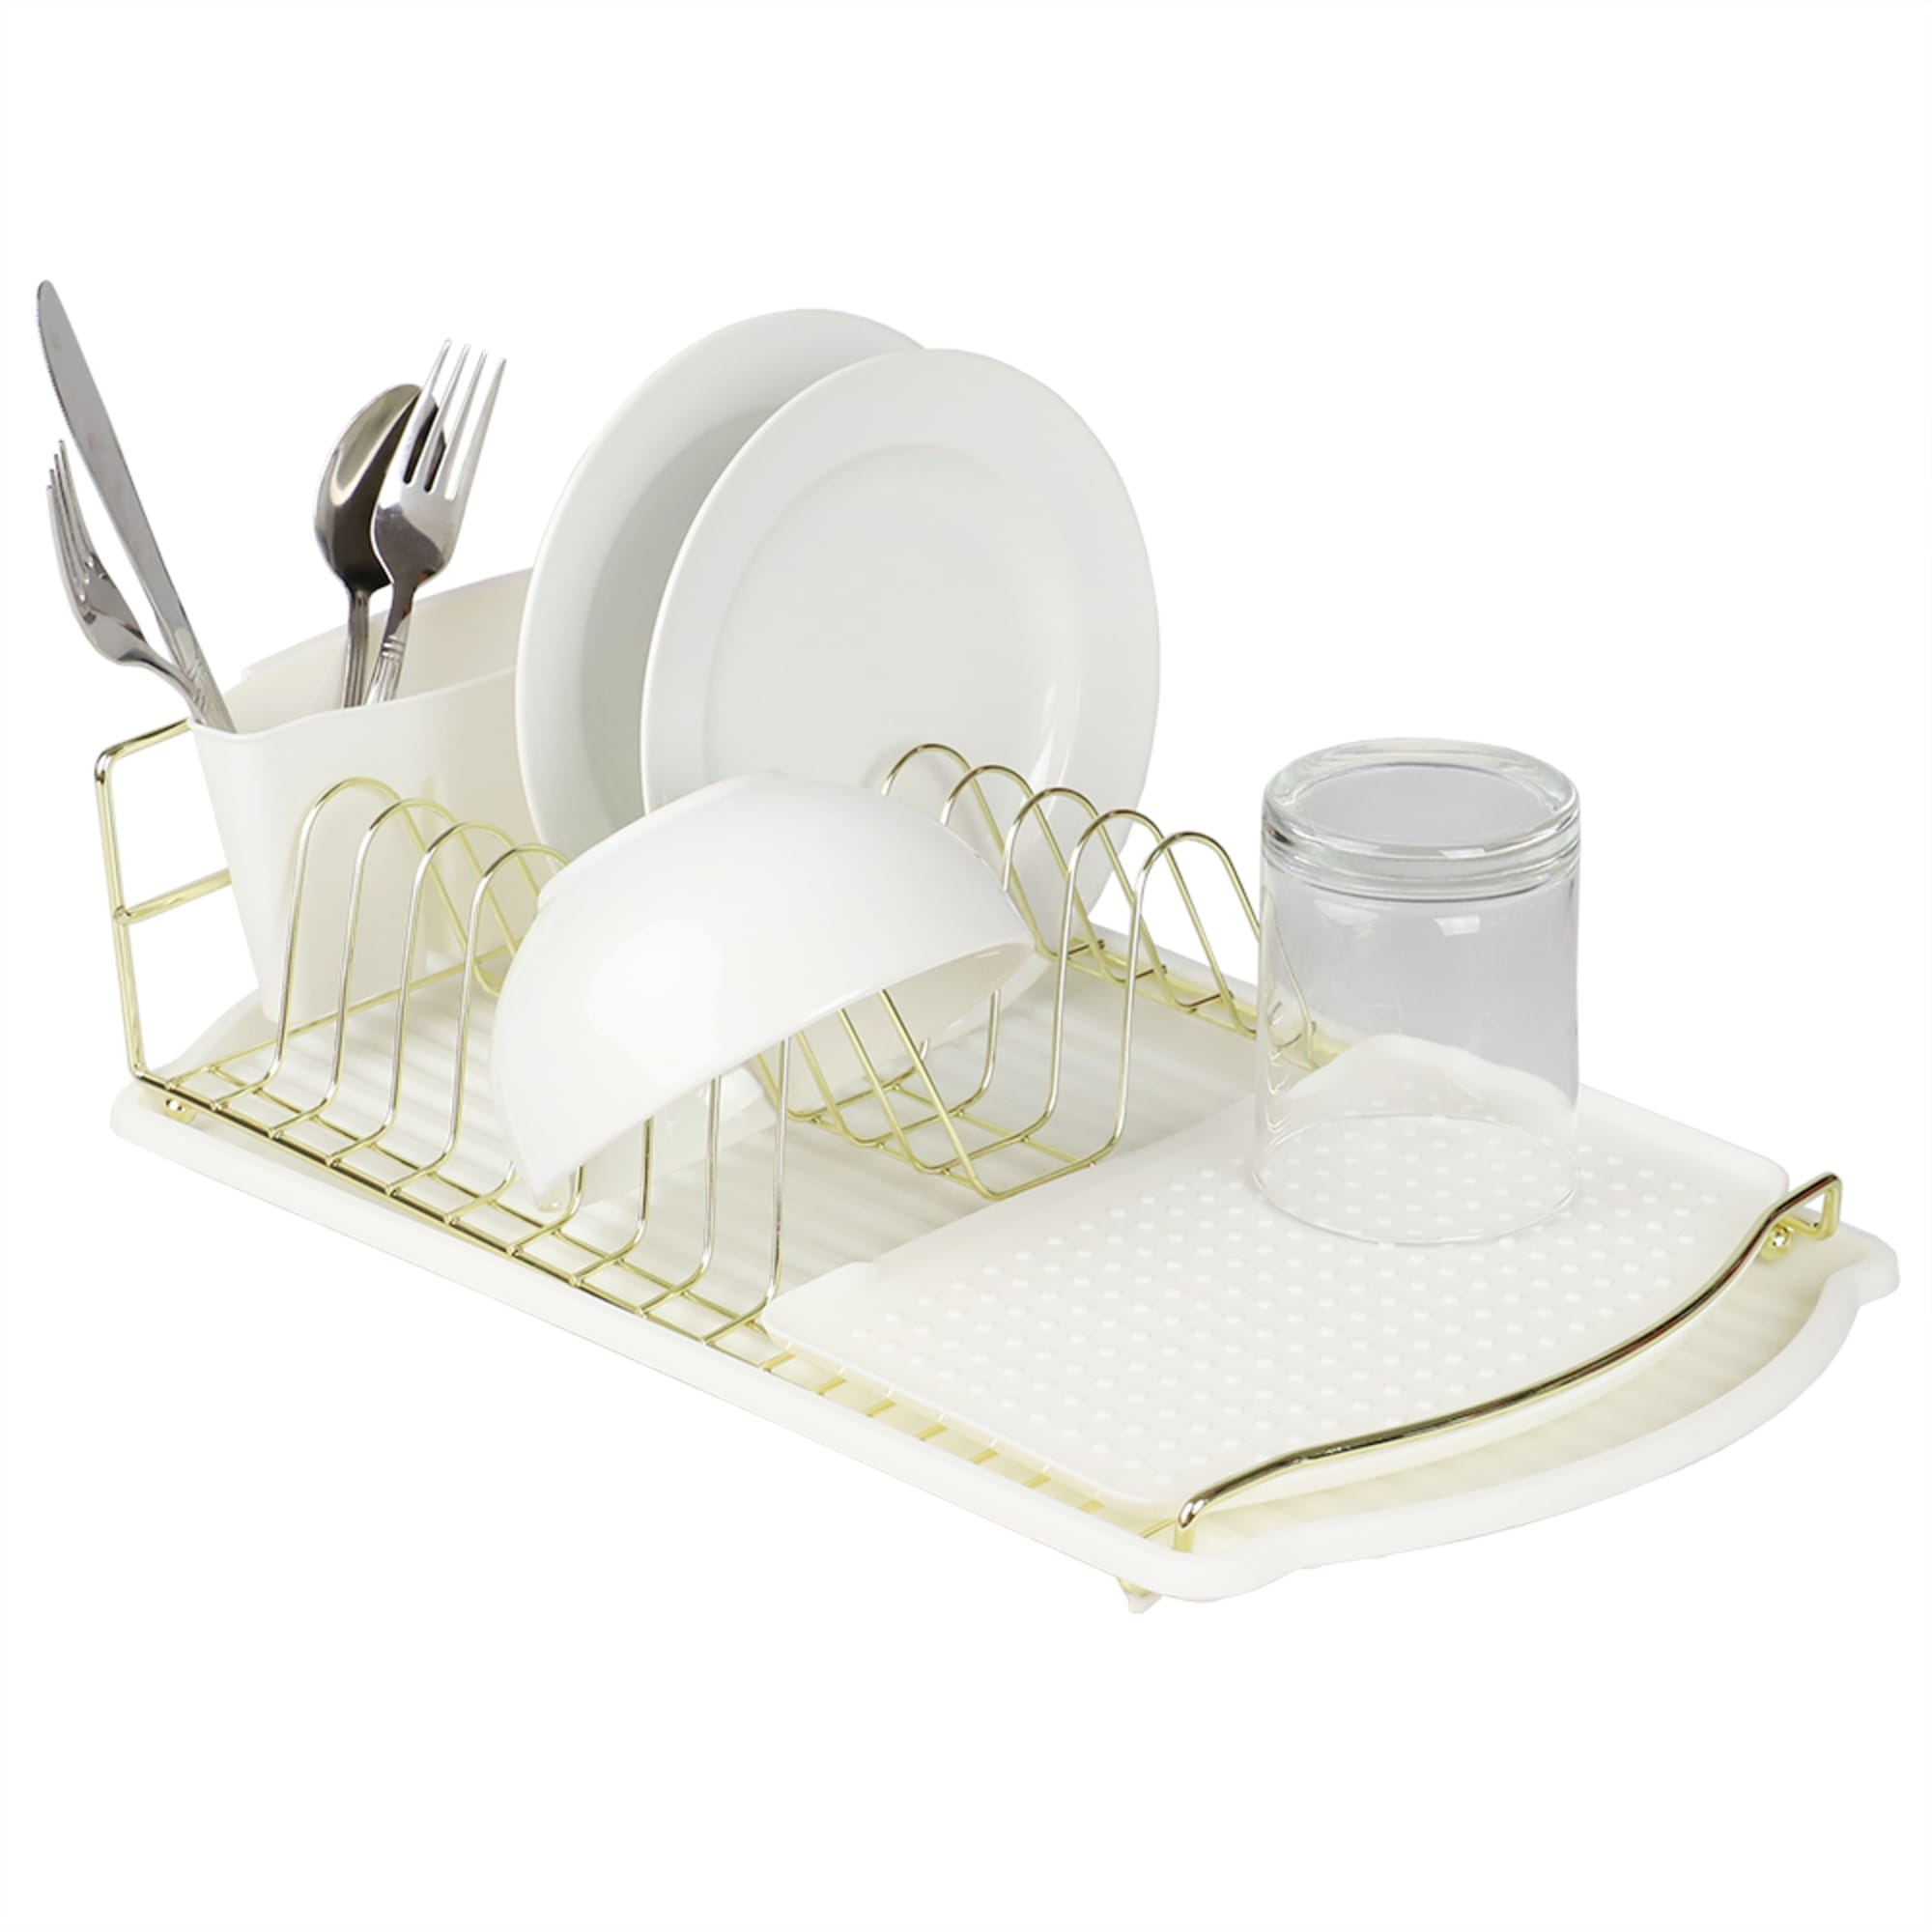 Michael Graves Design Gold Finish Steel Wire Compact Dish Rack with Oversized Utensil Holder, White $12.00 EACH, CASE PACK OF 6